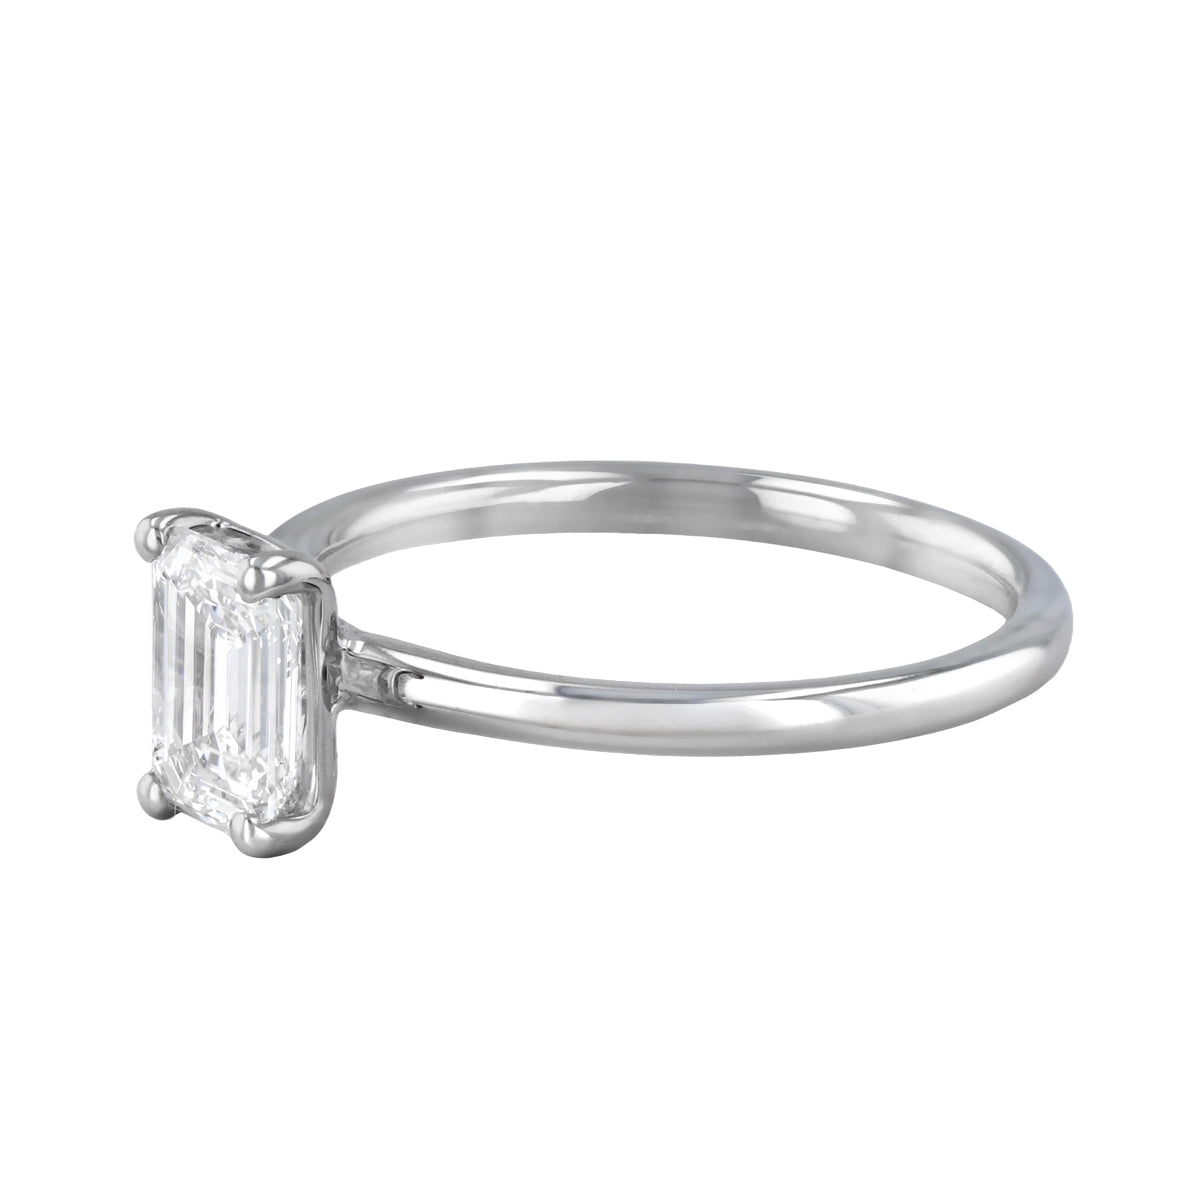 2-00ct-sofia-emerald-cut-solitaire-diamond-engagement-ring-18ct-white-gold